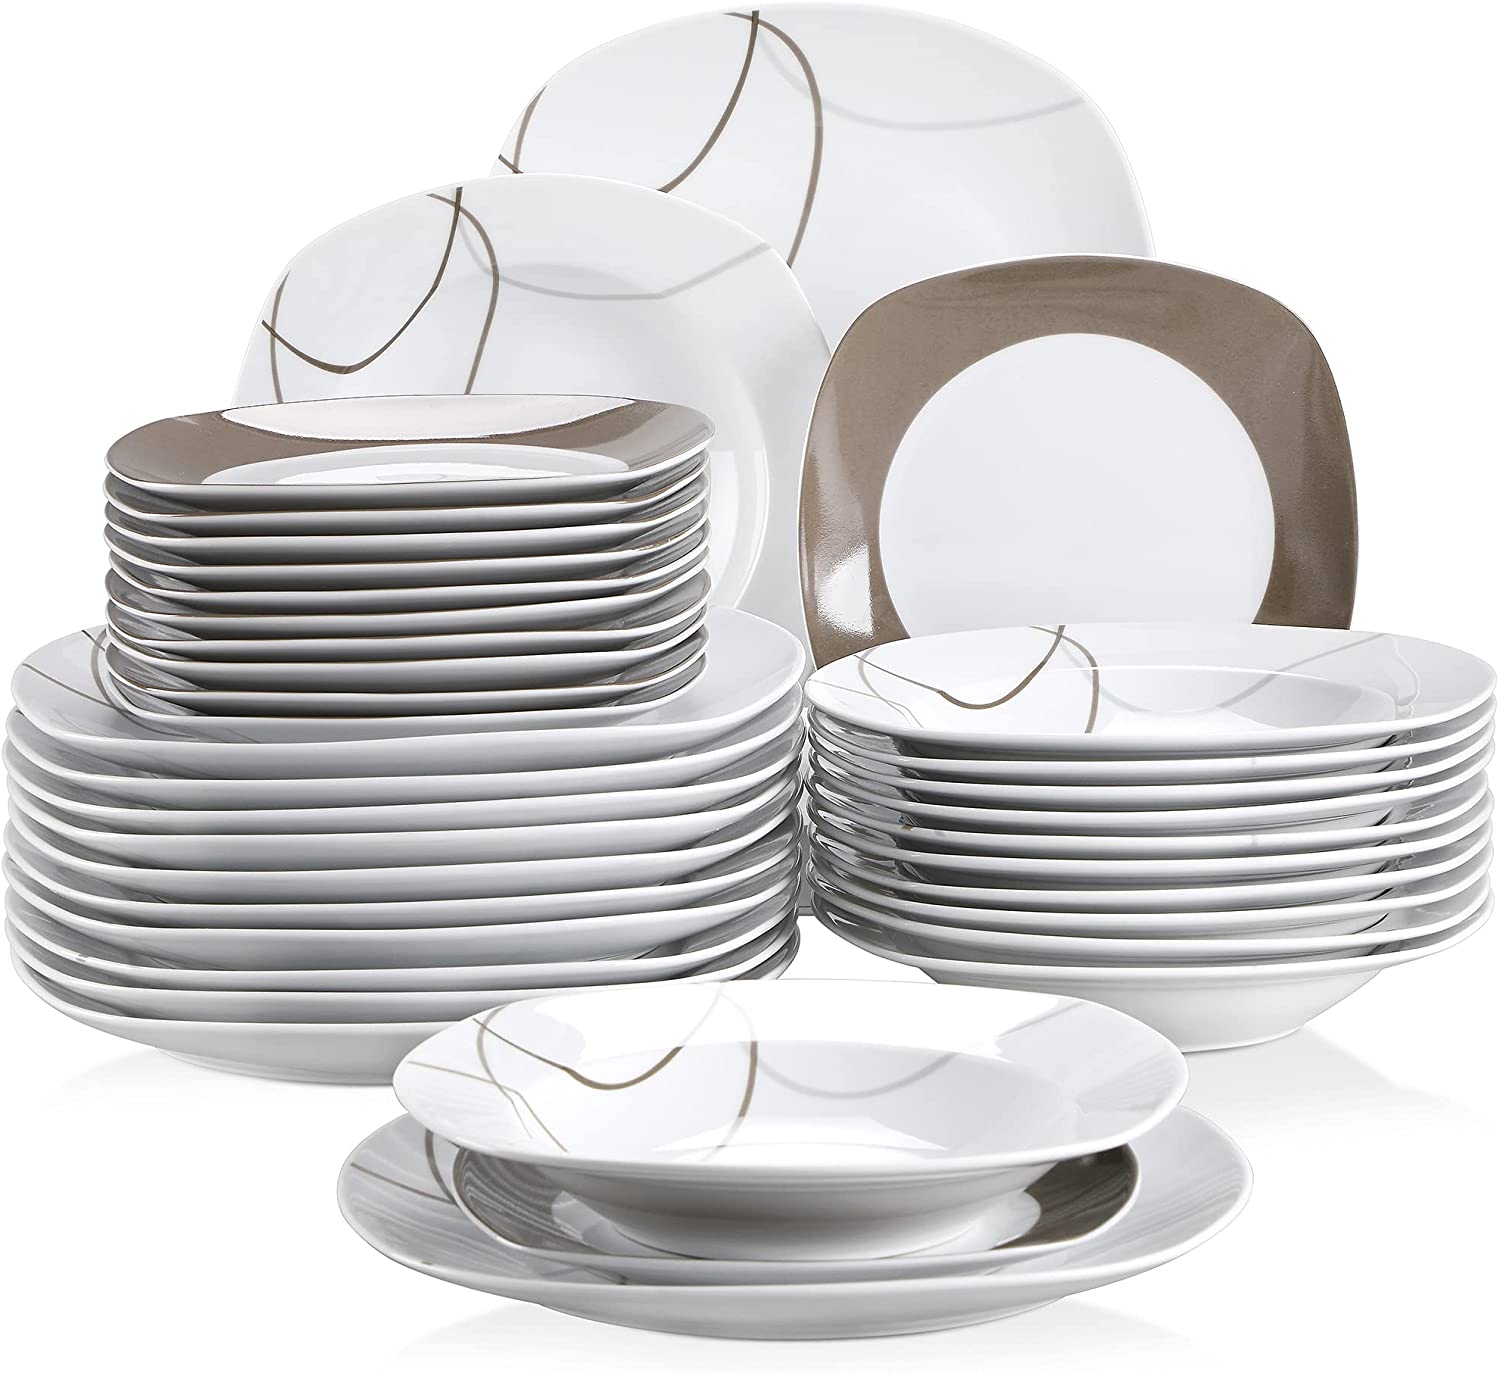 Veweet Aviva Porcelain Dinner Service 30 Pieces / 60 Pieces and Multiple additional products that can be combined with the Aviva Dinner Service